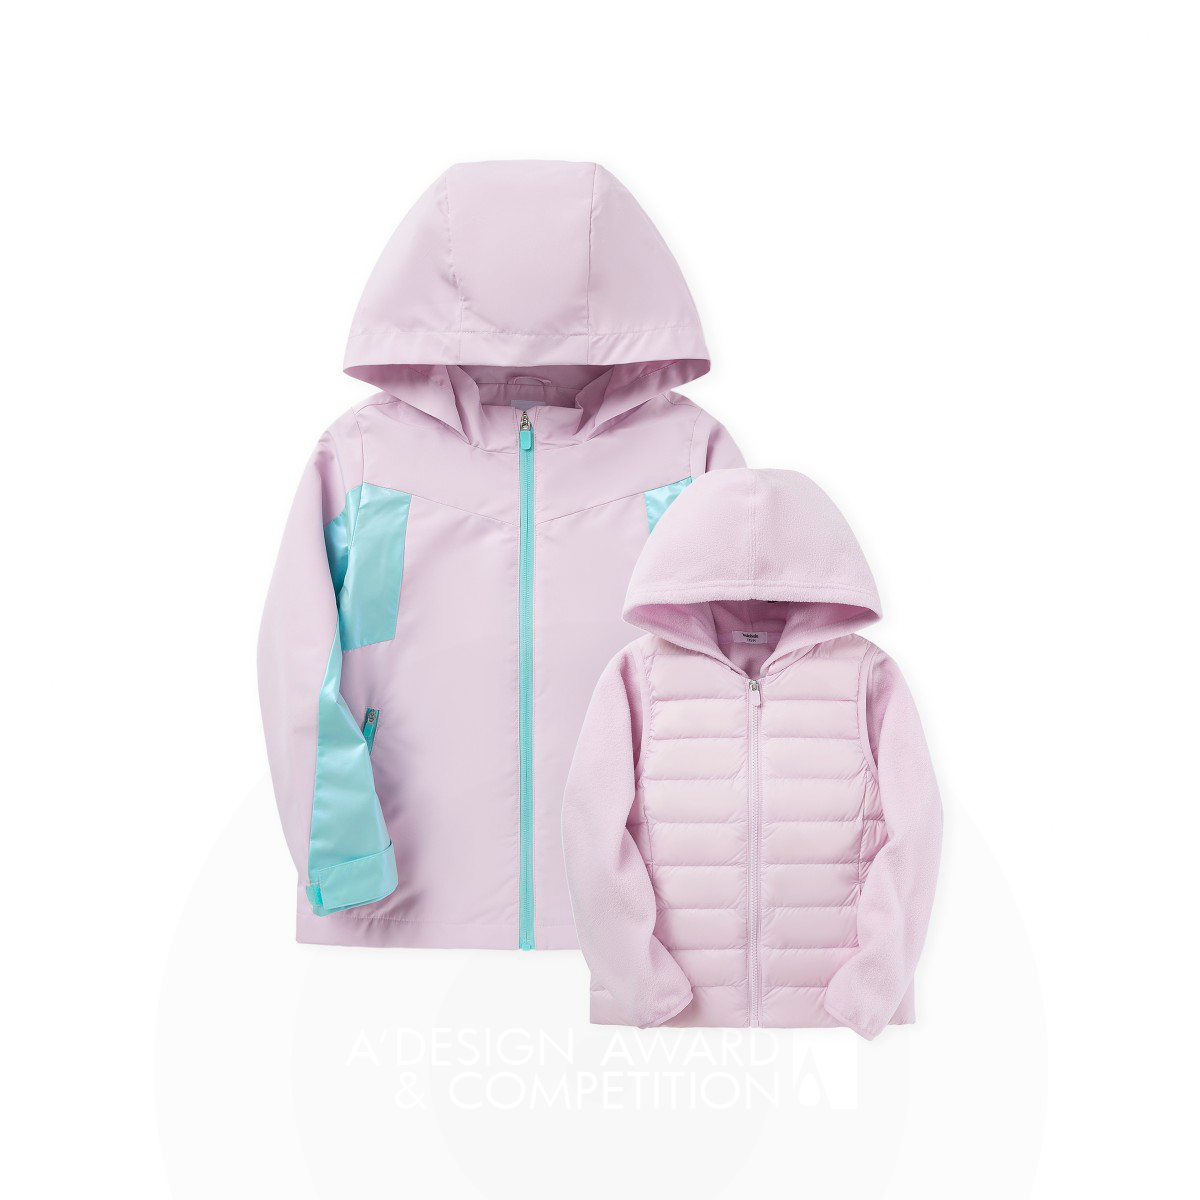 ZHE JIANG SEMIR GARMENT CO.LTD wins Silver at the prestigious A' Baby, Kids and Children's Products Design Award with Down Jackets Clothing.